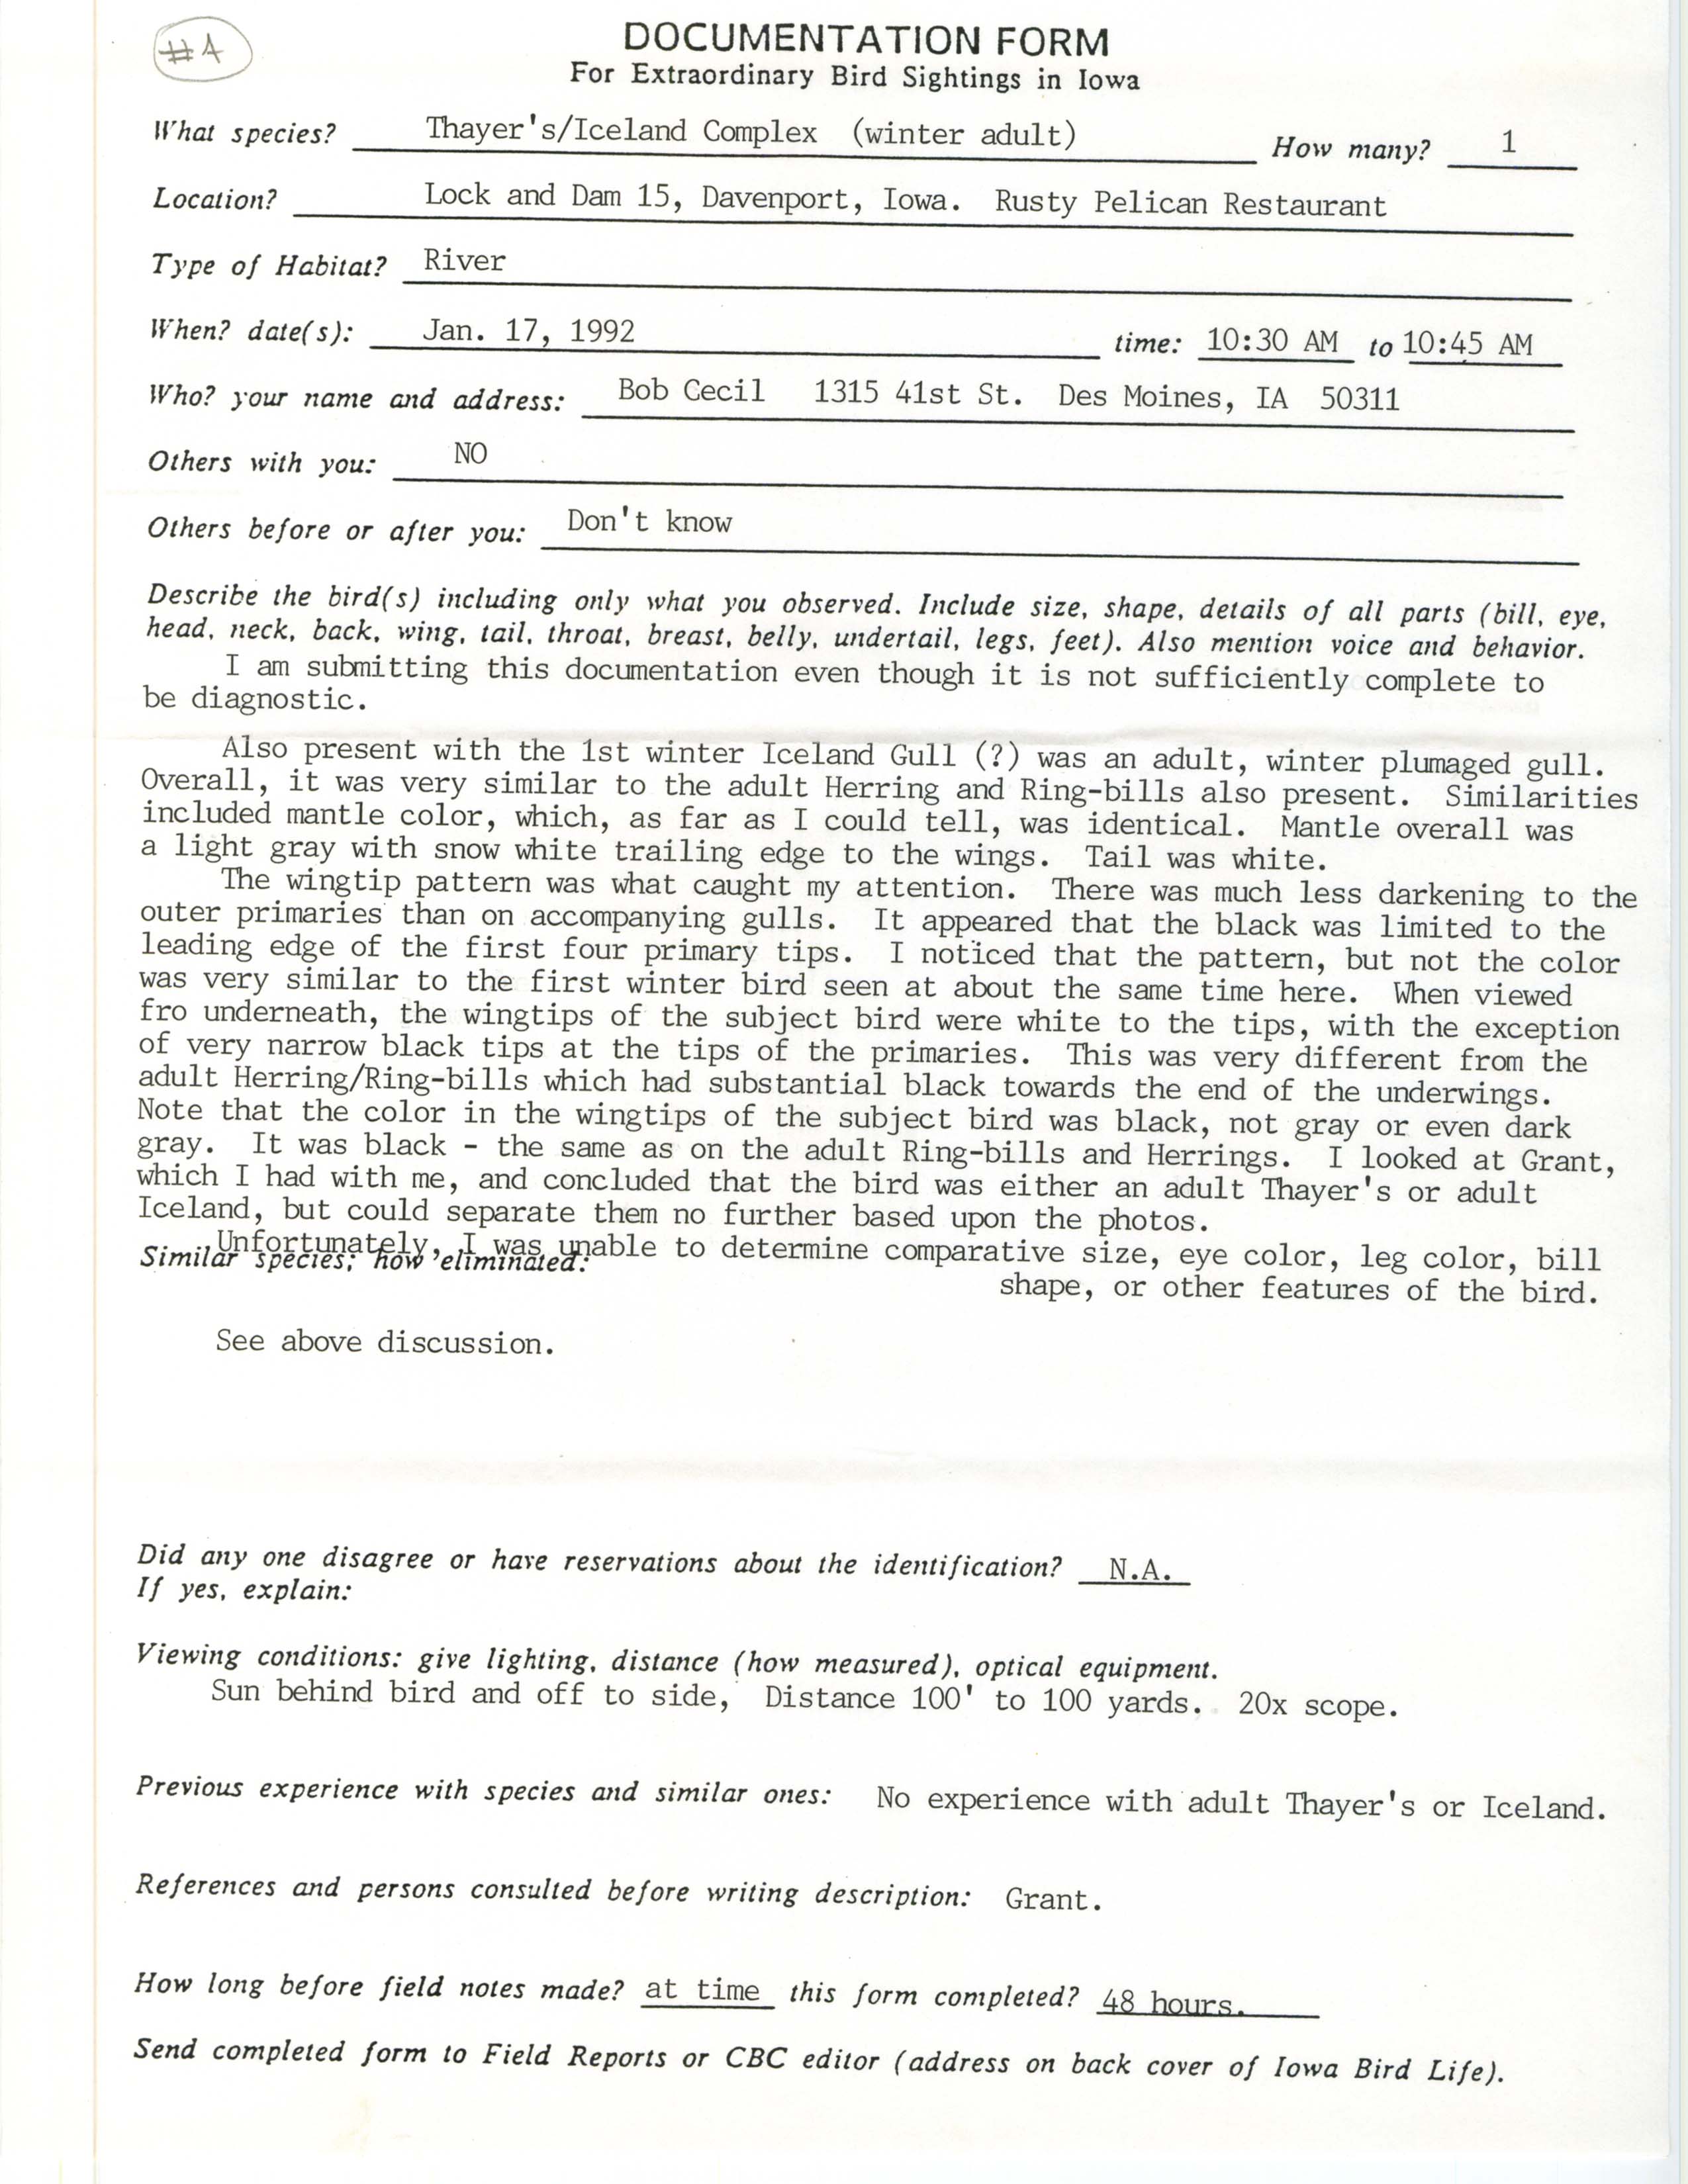 Rare bird documentation form for Thayer's Gull at Lock and Dam 15 in Davenport, 1992